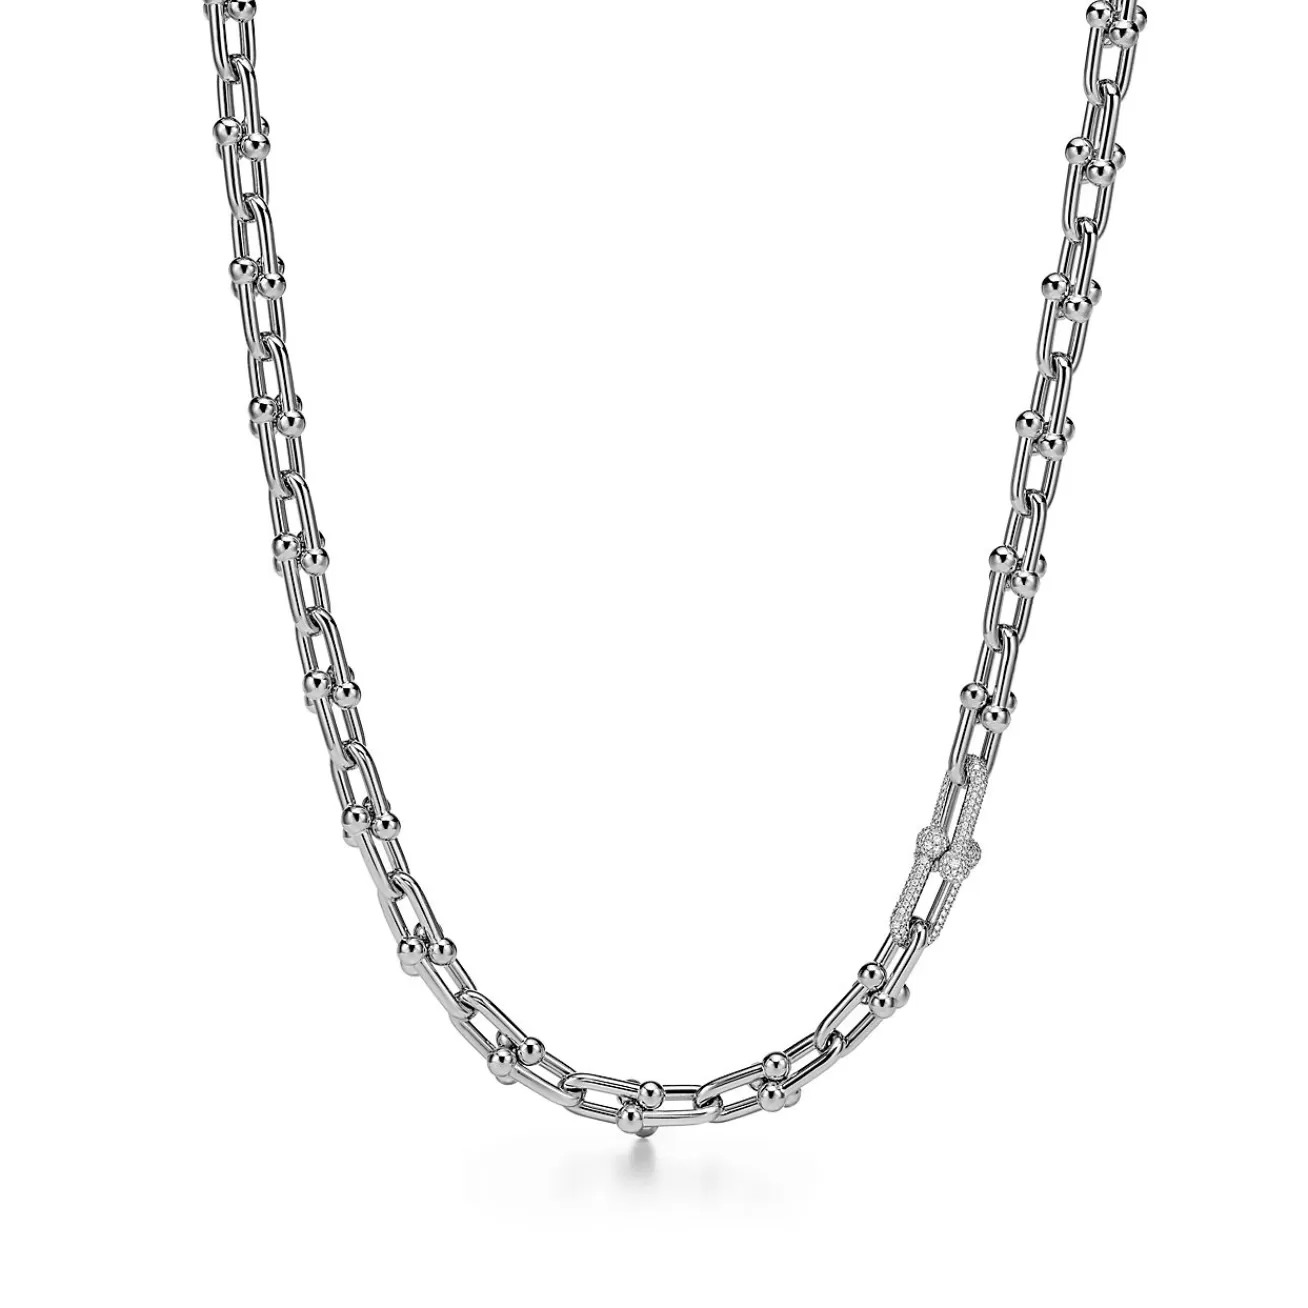 Tiffany & Co. Tiffany HardWear Medium Link Necklace in White Gold with Diamonds | ^ Necklaces & Pendants | Men's Jewelry